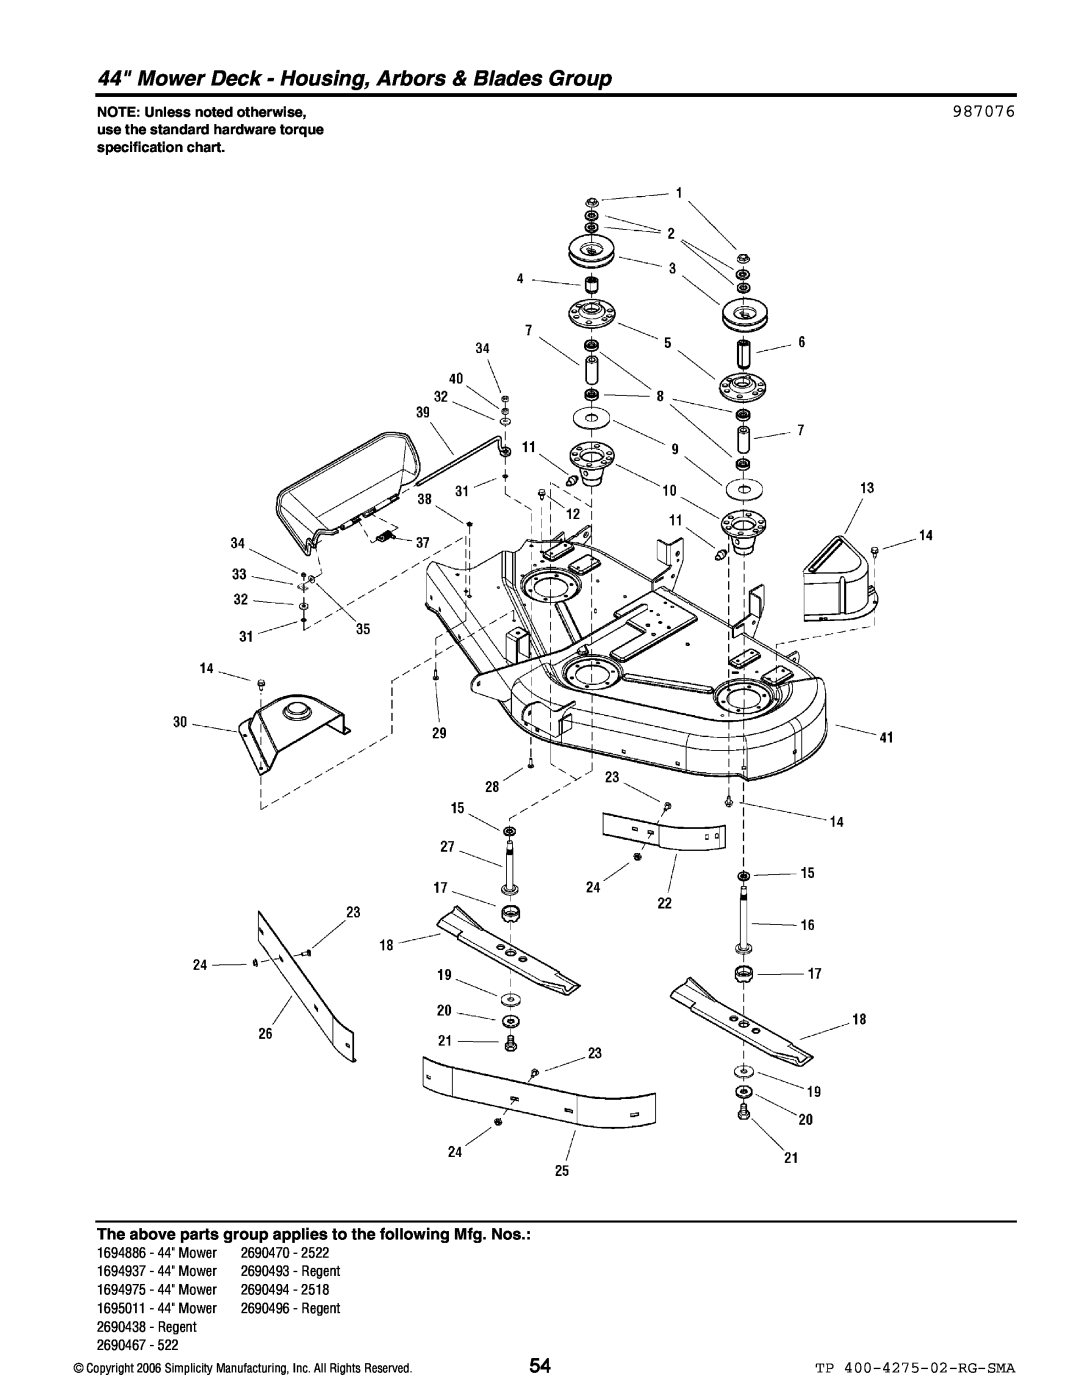 Simplicity 18.5HP Mower Deck - Housing, Arbors & Blades Group, 987076, TP 400-4275-02-RG-SMA, NOTE Unless noted otherwise 